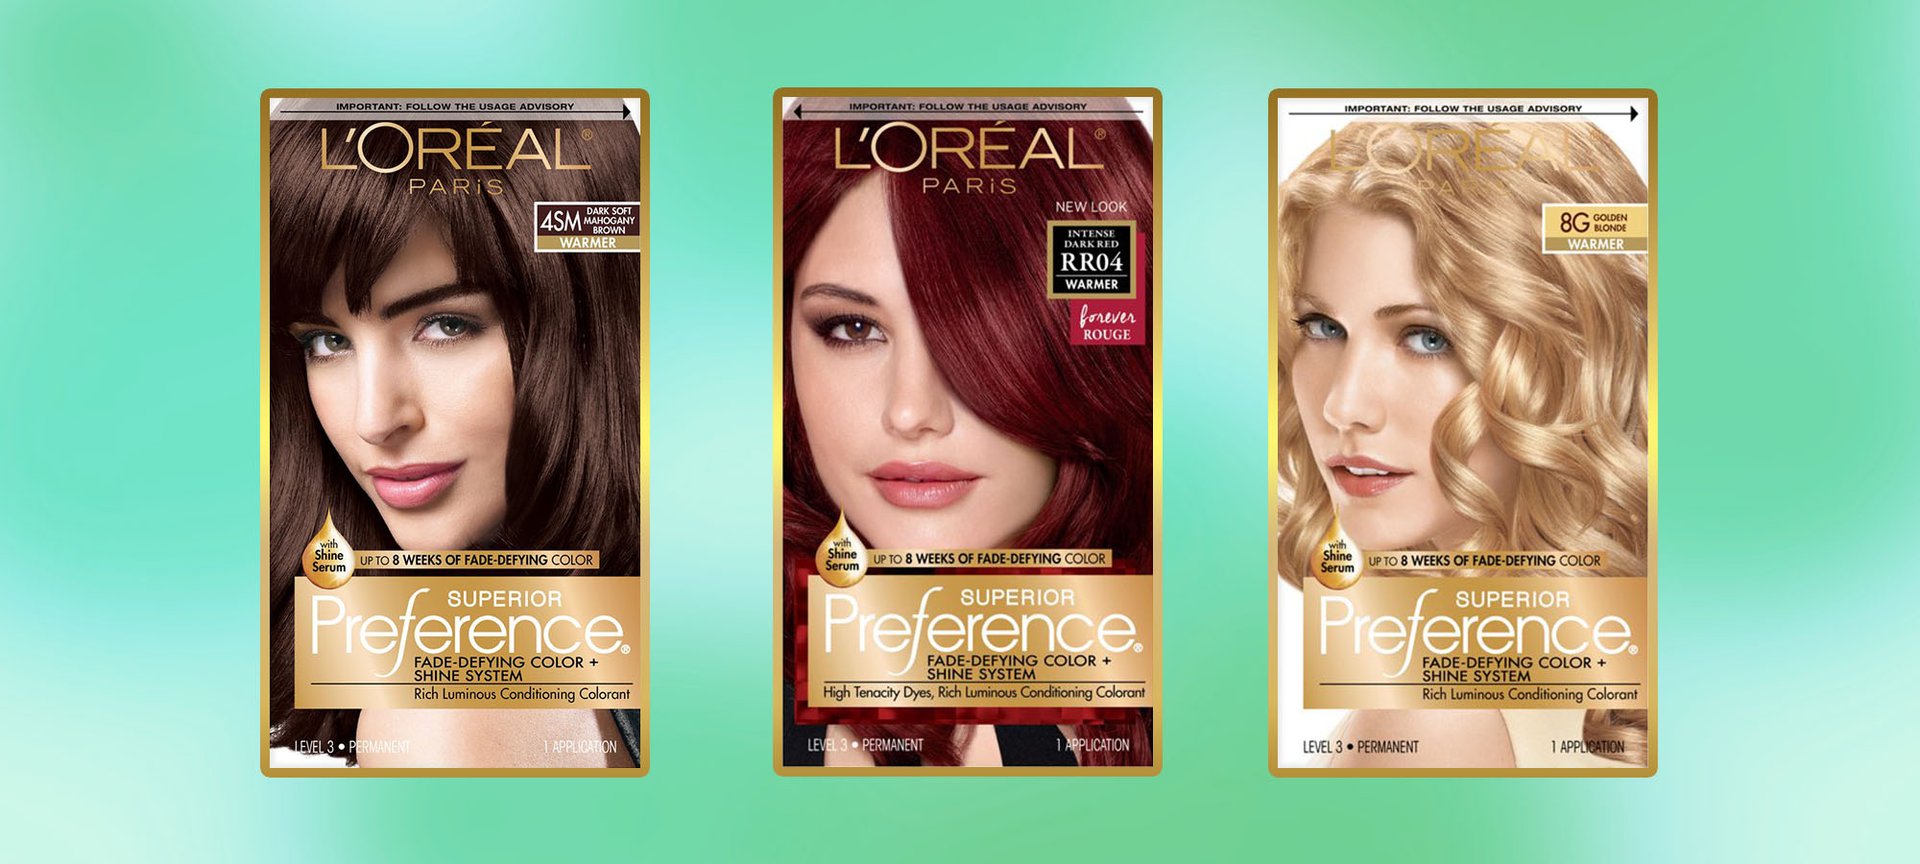 https://www.lorealparisusa.com/-/media/project/loreal/brand-sites/oap/americas/us/beauty-magazine/2021/september/9-15/loreal-preference-hair-color-chart/loreal-paris-superior-preference-hair-color-chart-cms-bmag.jpg